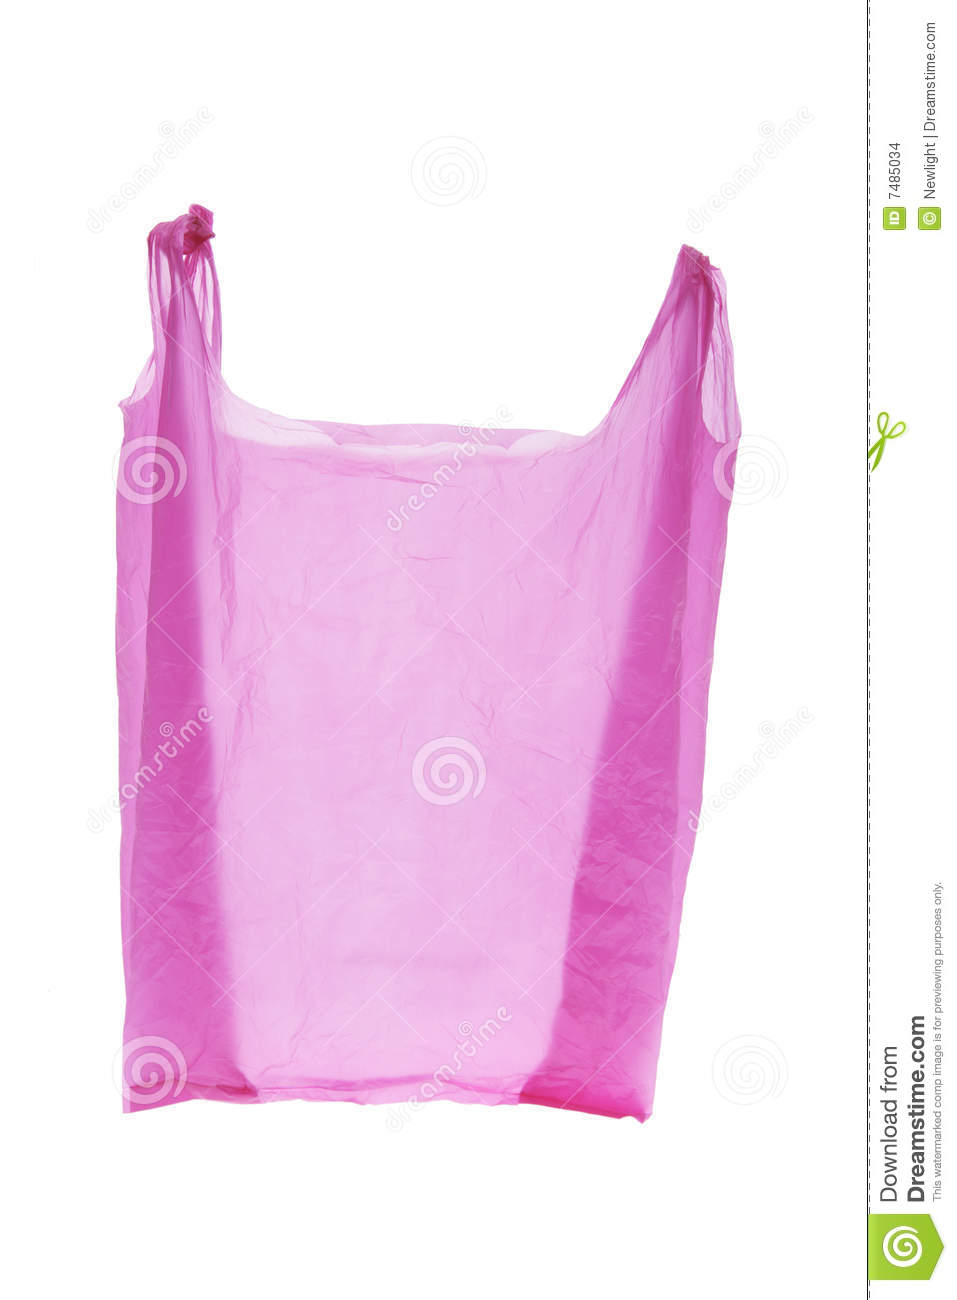 More Similar Stock Images Of   Plastic Shopping Bag